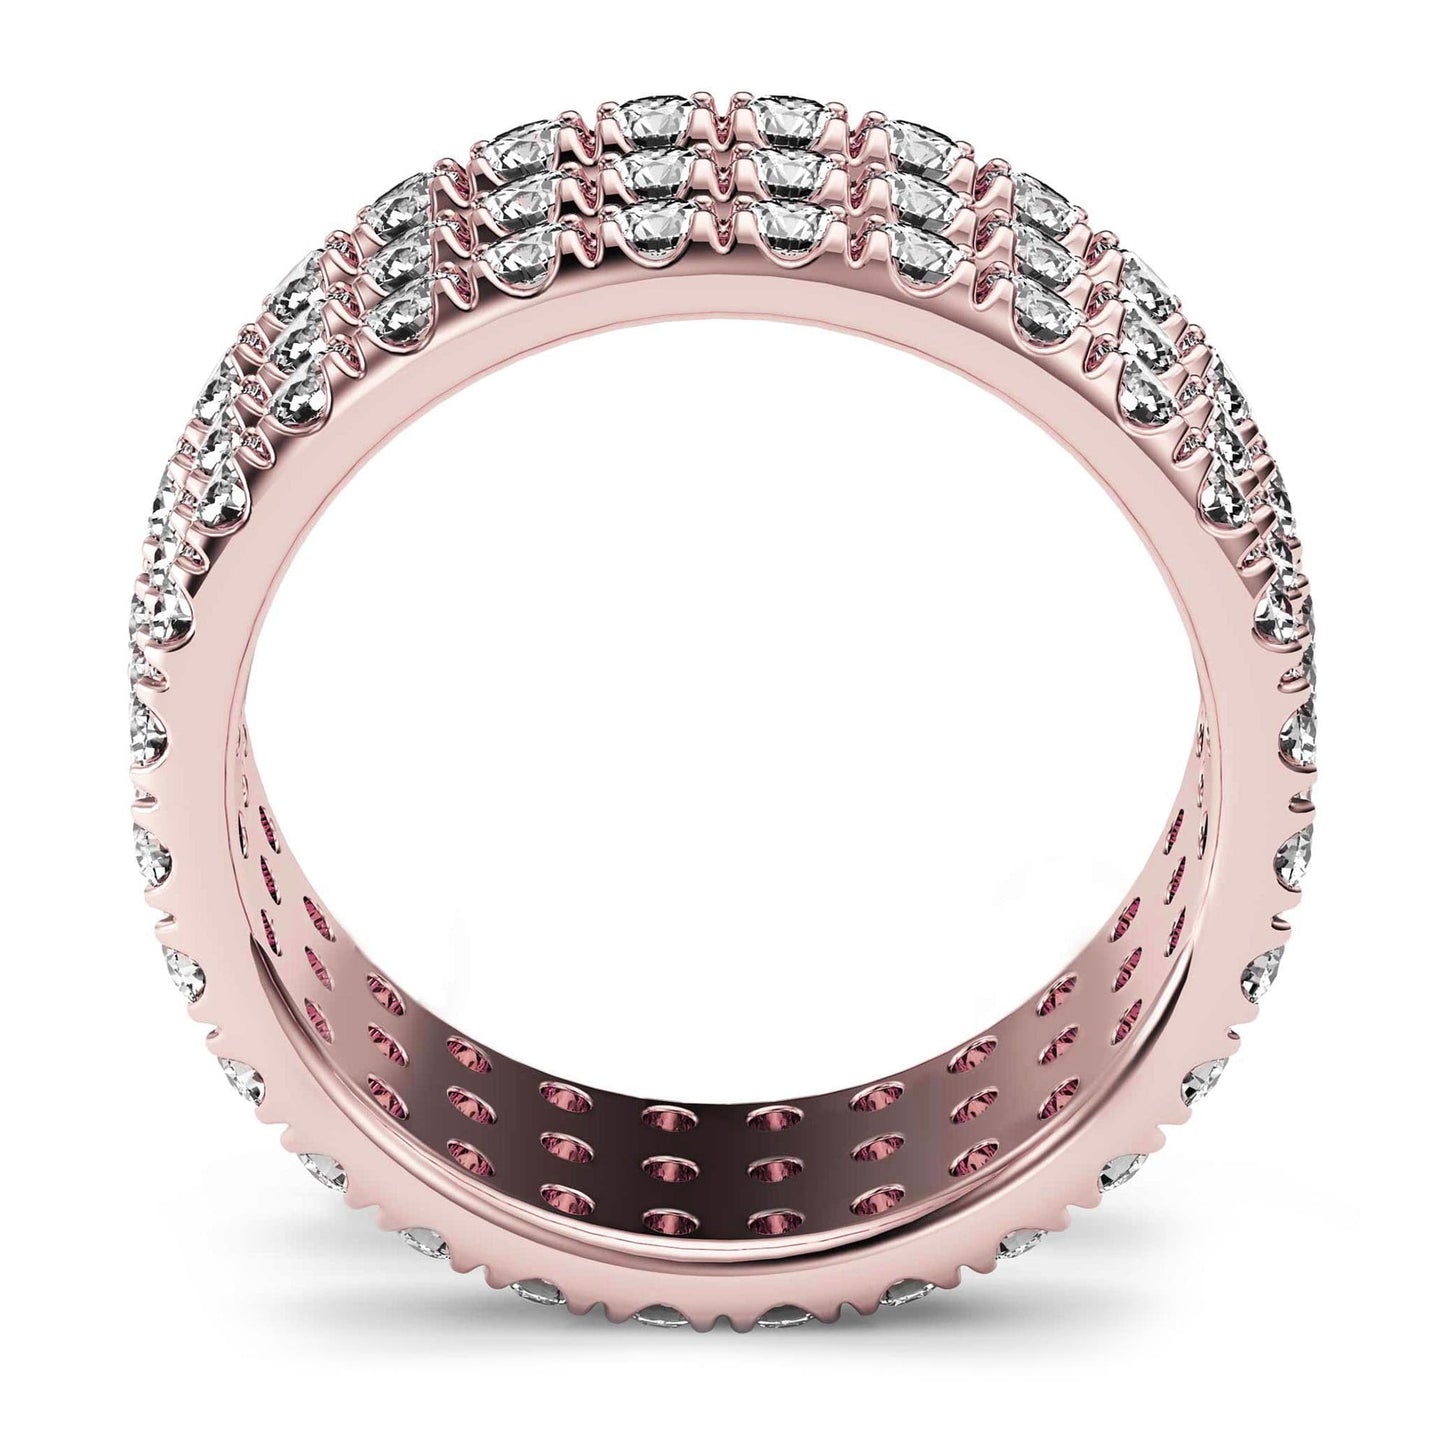 2.75ct French Pave Multi Row Diamond Eternity Ring in 14k Gold